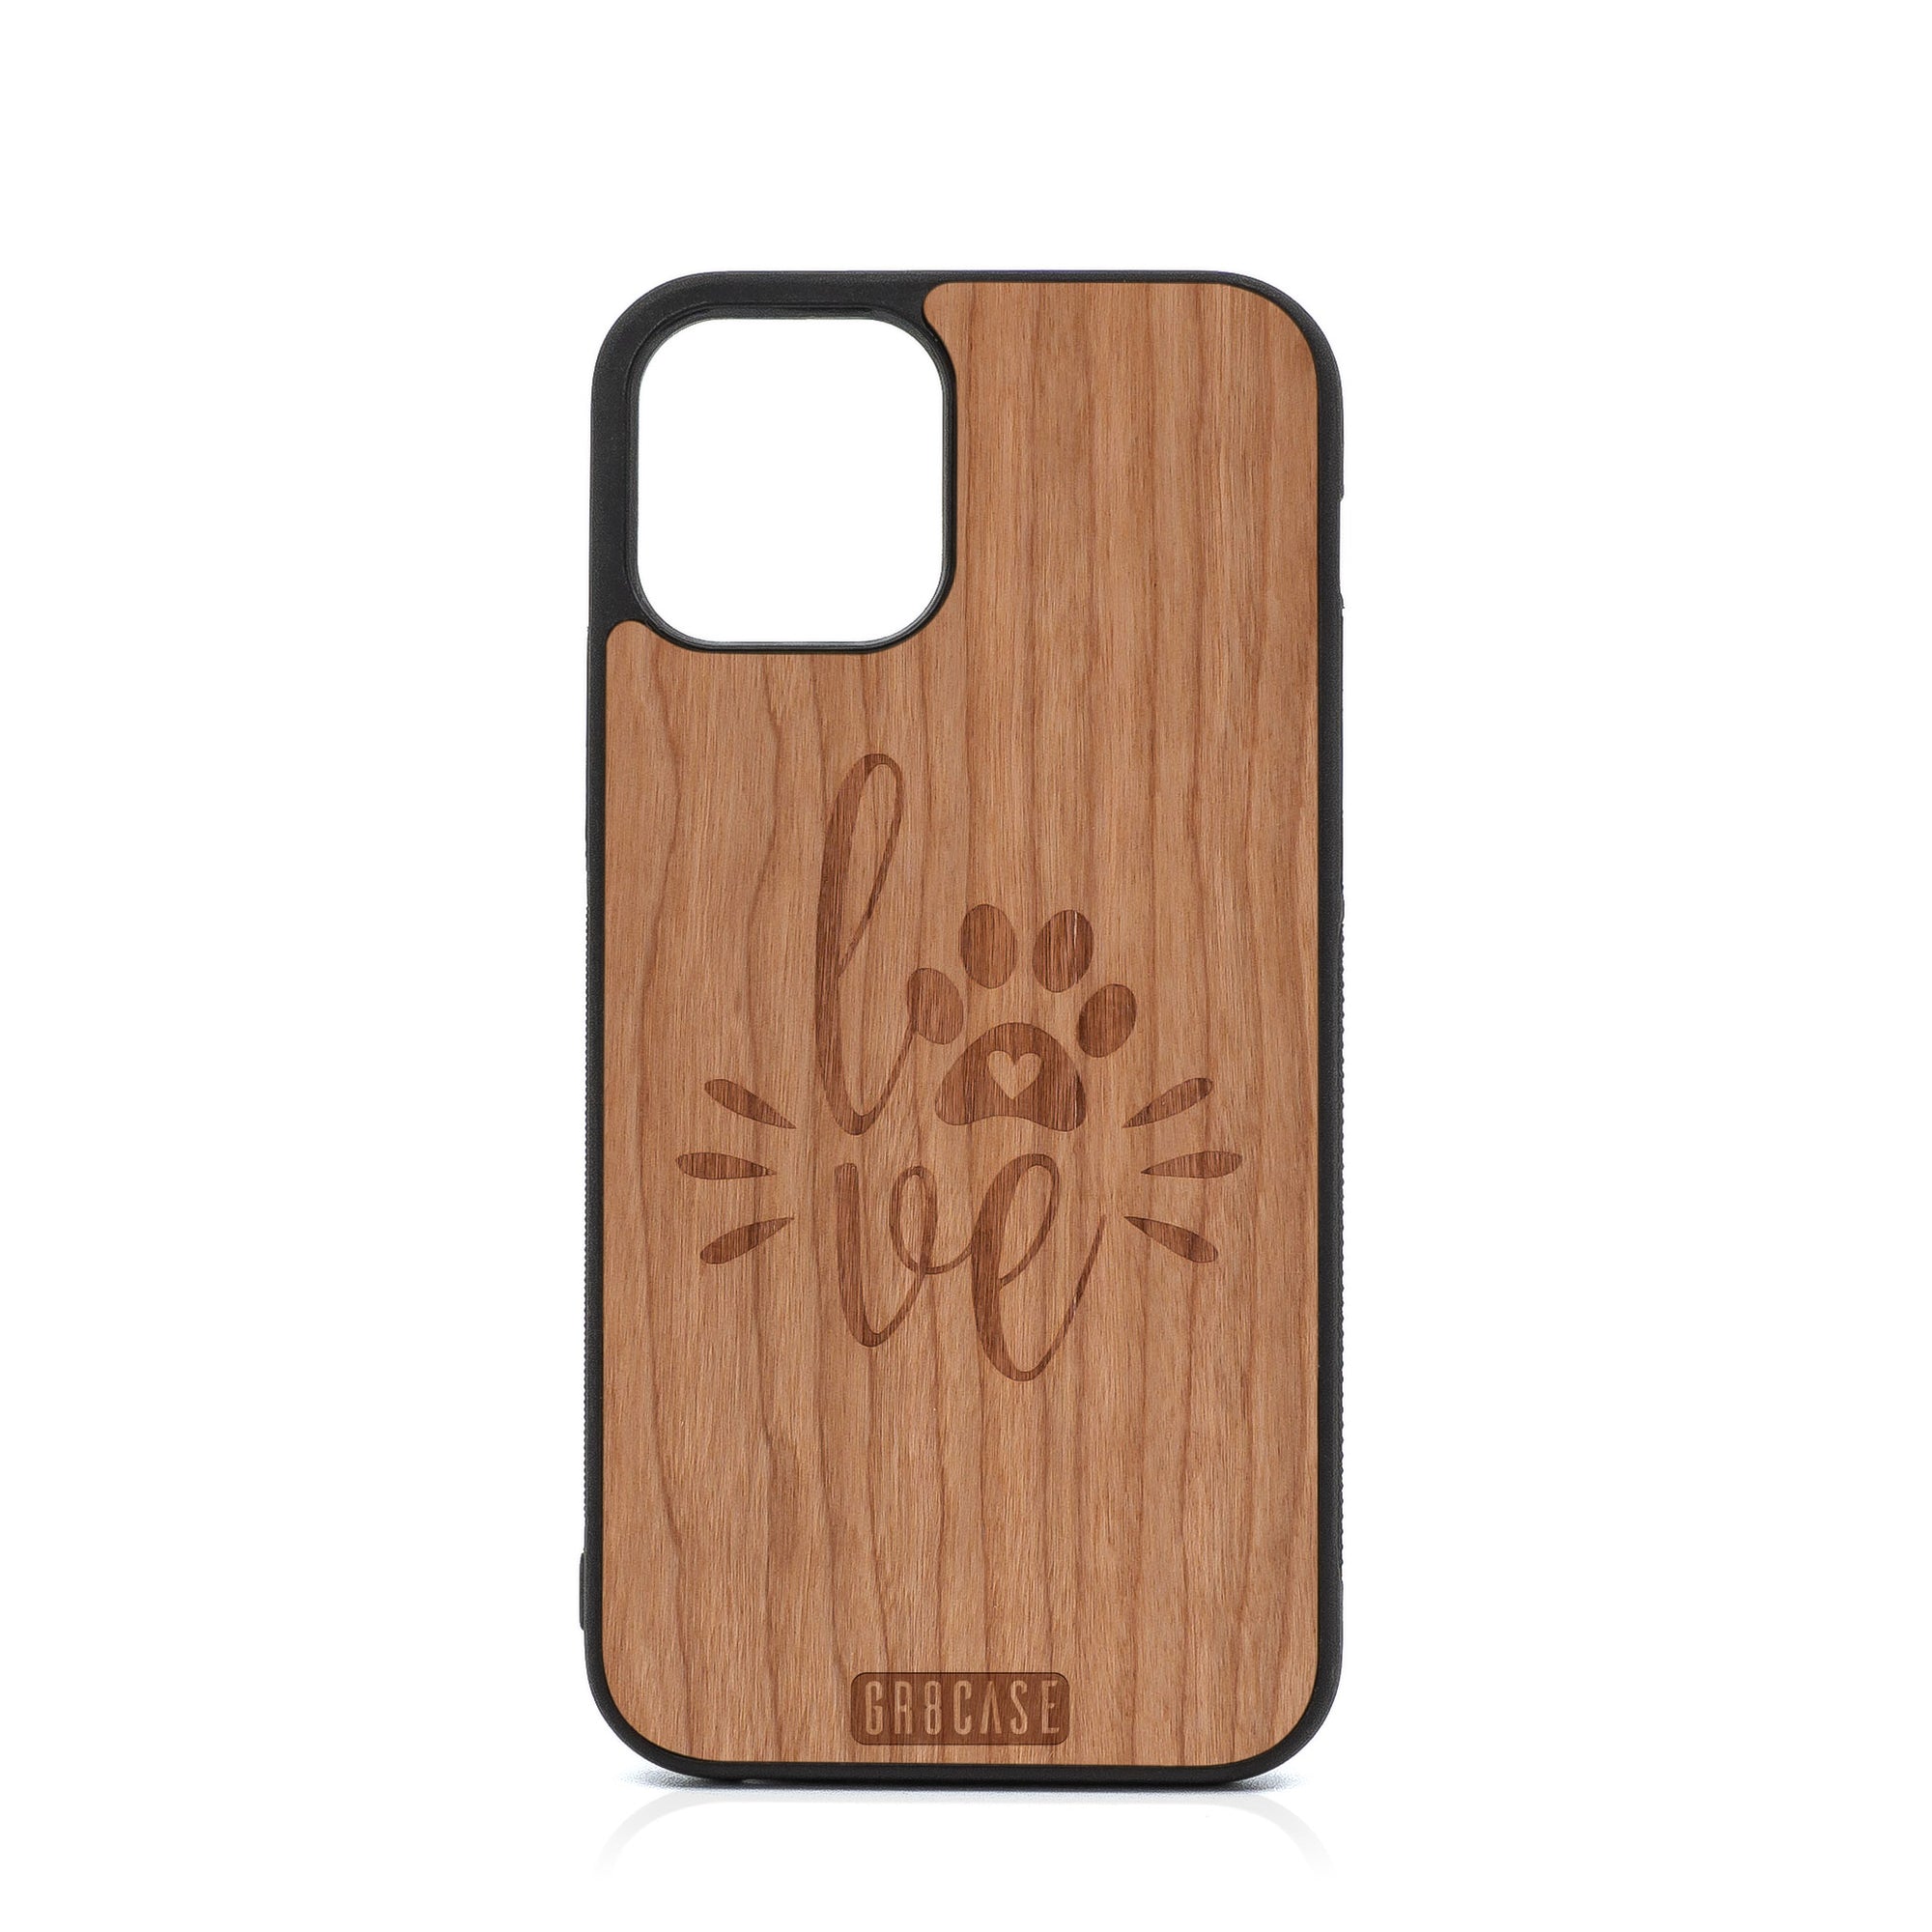 Paw Love Design Wood Case For iPhone 12 Pro